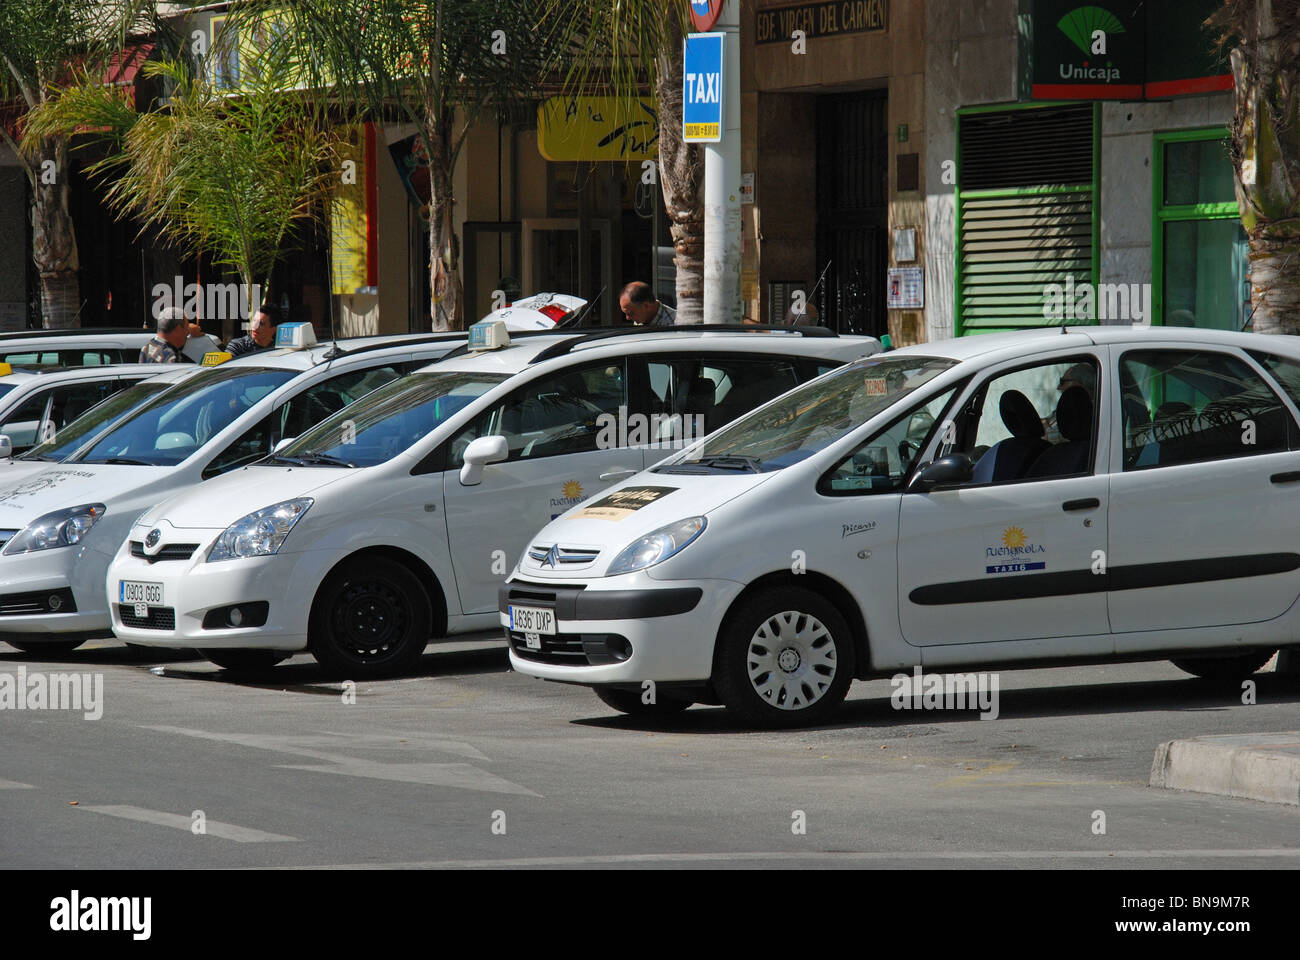 Taxi rank by the bus station, Fuengirola, Costa del Sol, Malaga Province,  Andalucia, Spain, Western Europe Stock Photo - Alamy